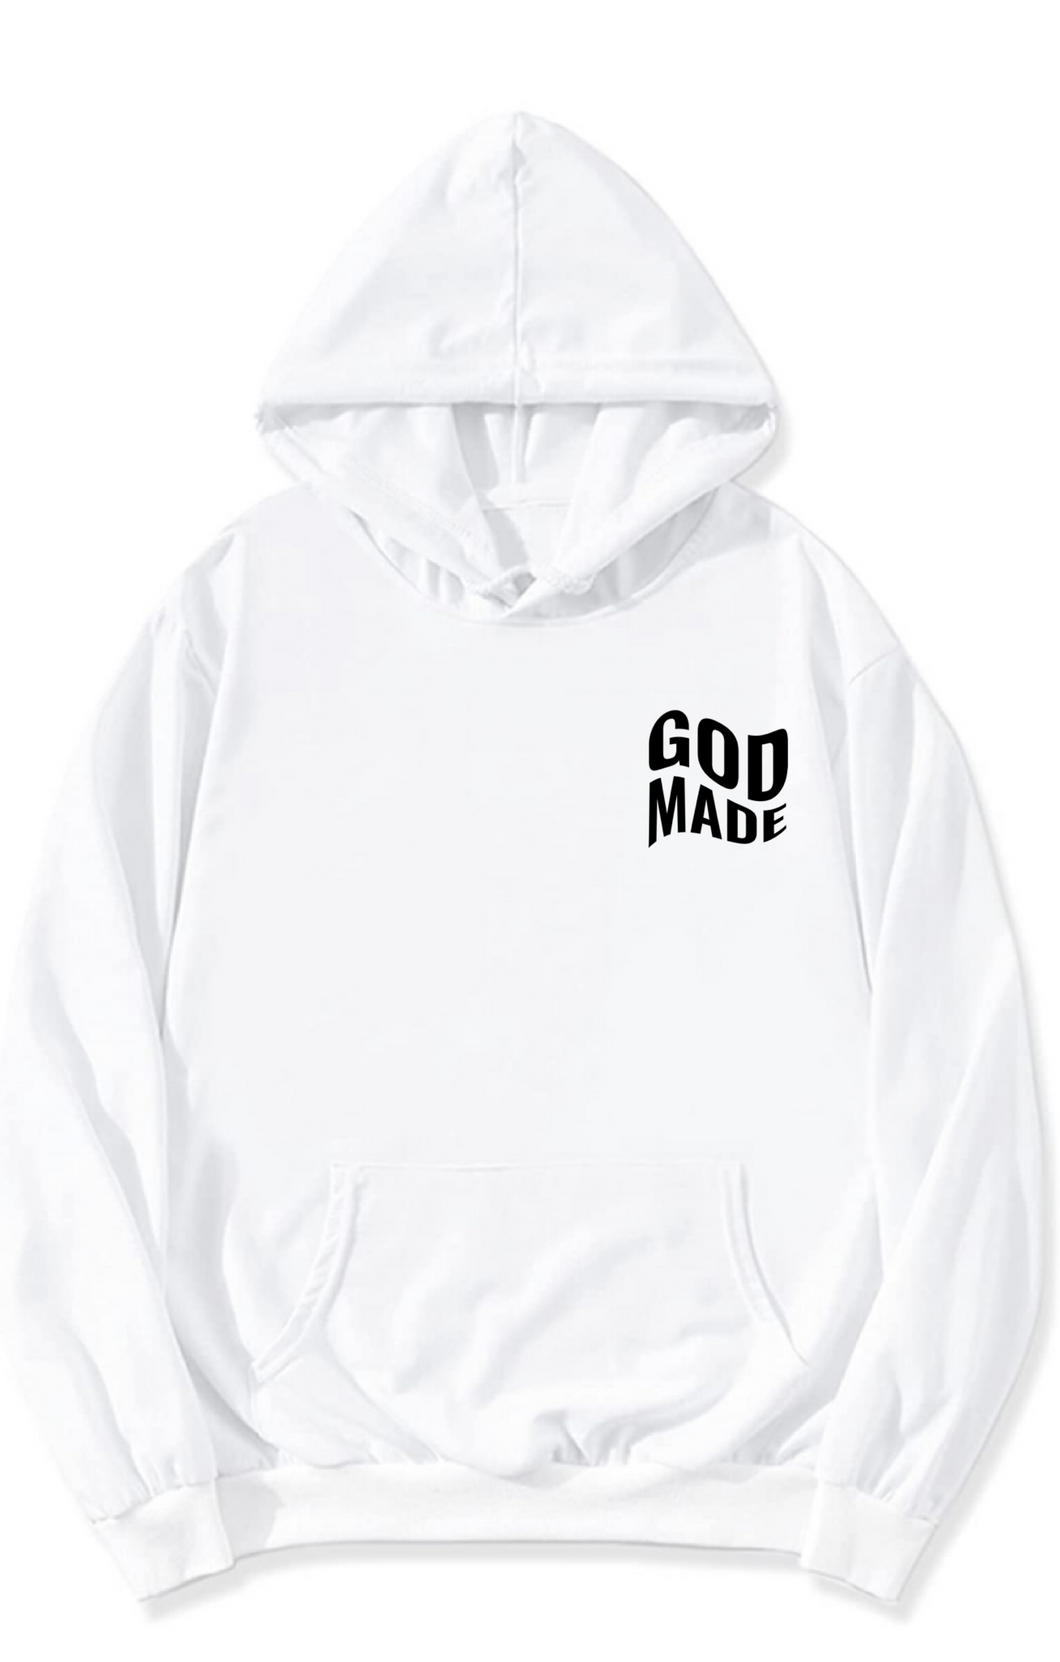 You Can't Duplicate What God Created Hoodie